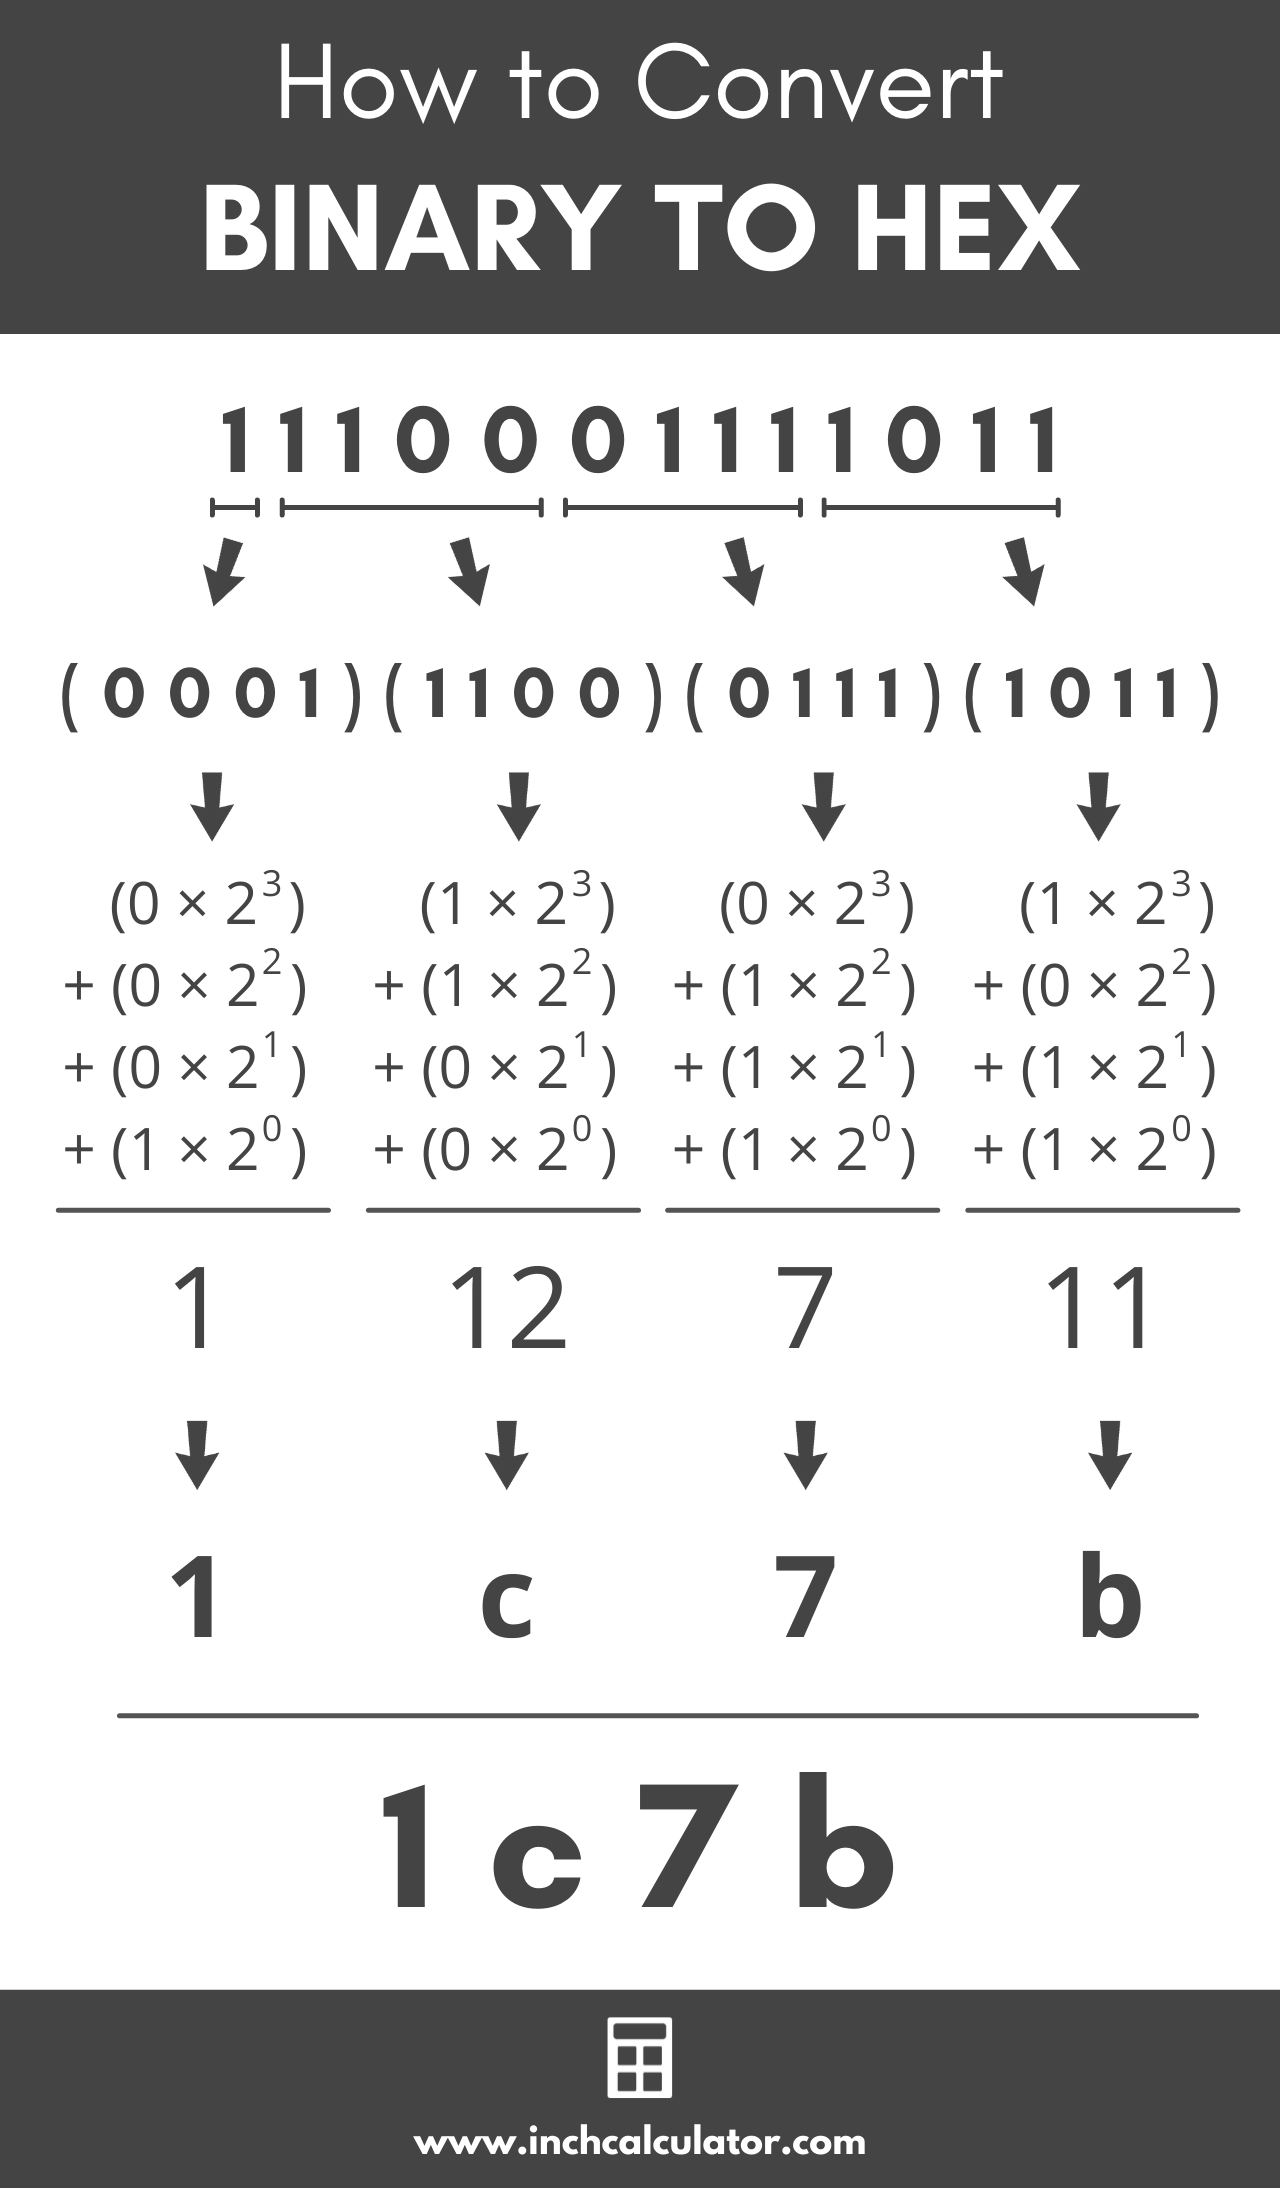 graphic showing how to convert a binary number to hexadecimal